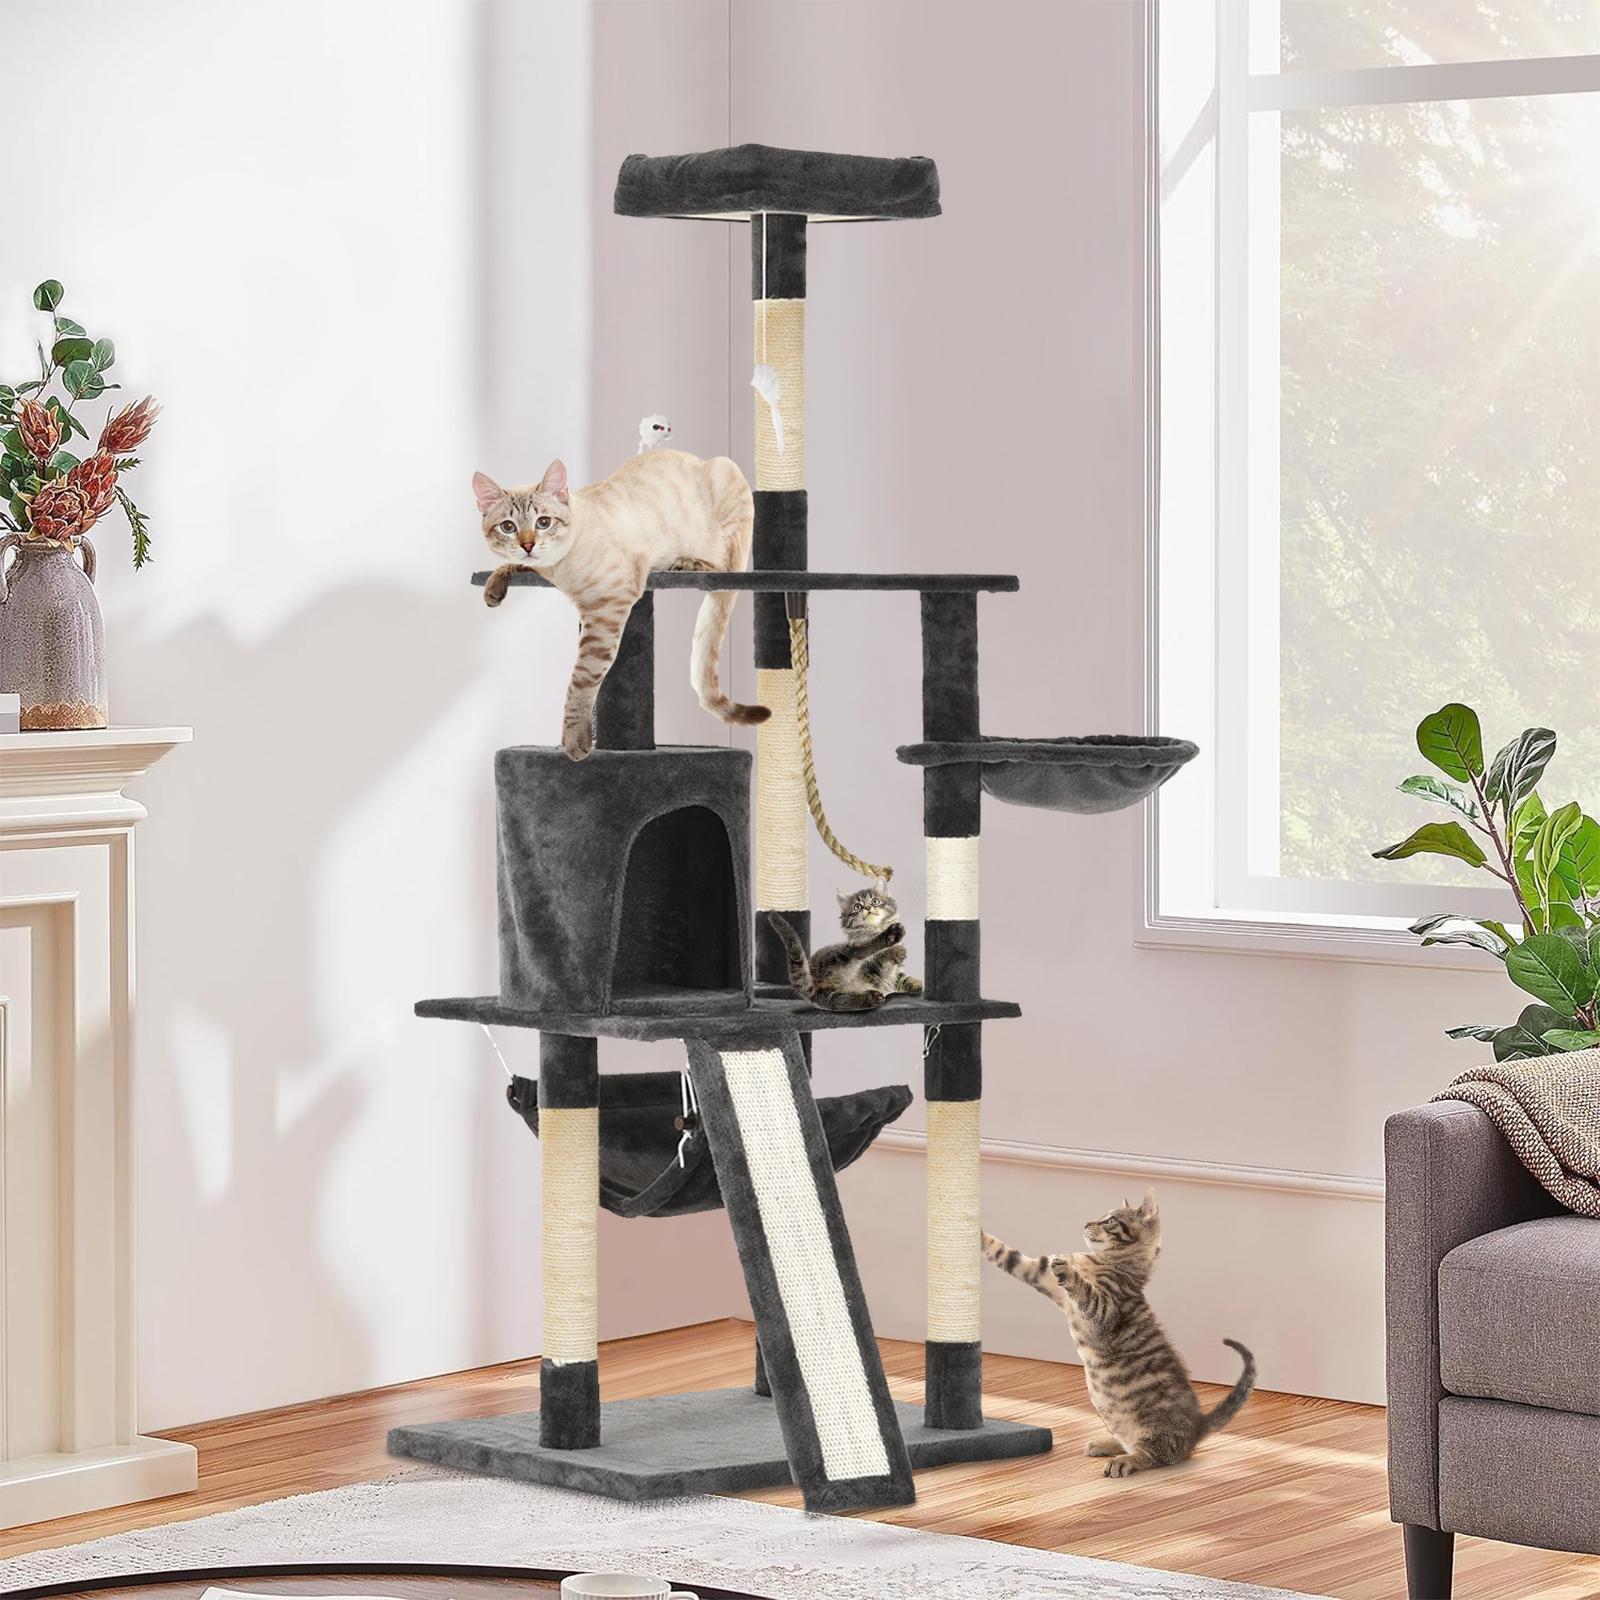 ADVWIN 157CM Cat Tree Scratching Post Tower